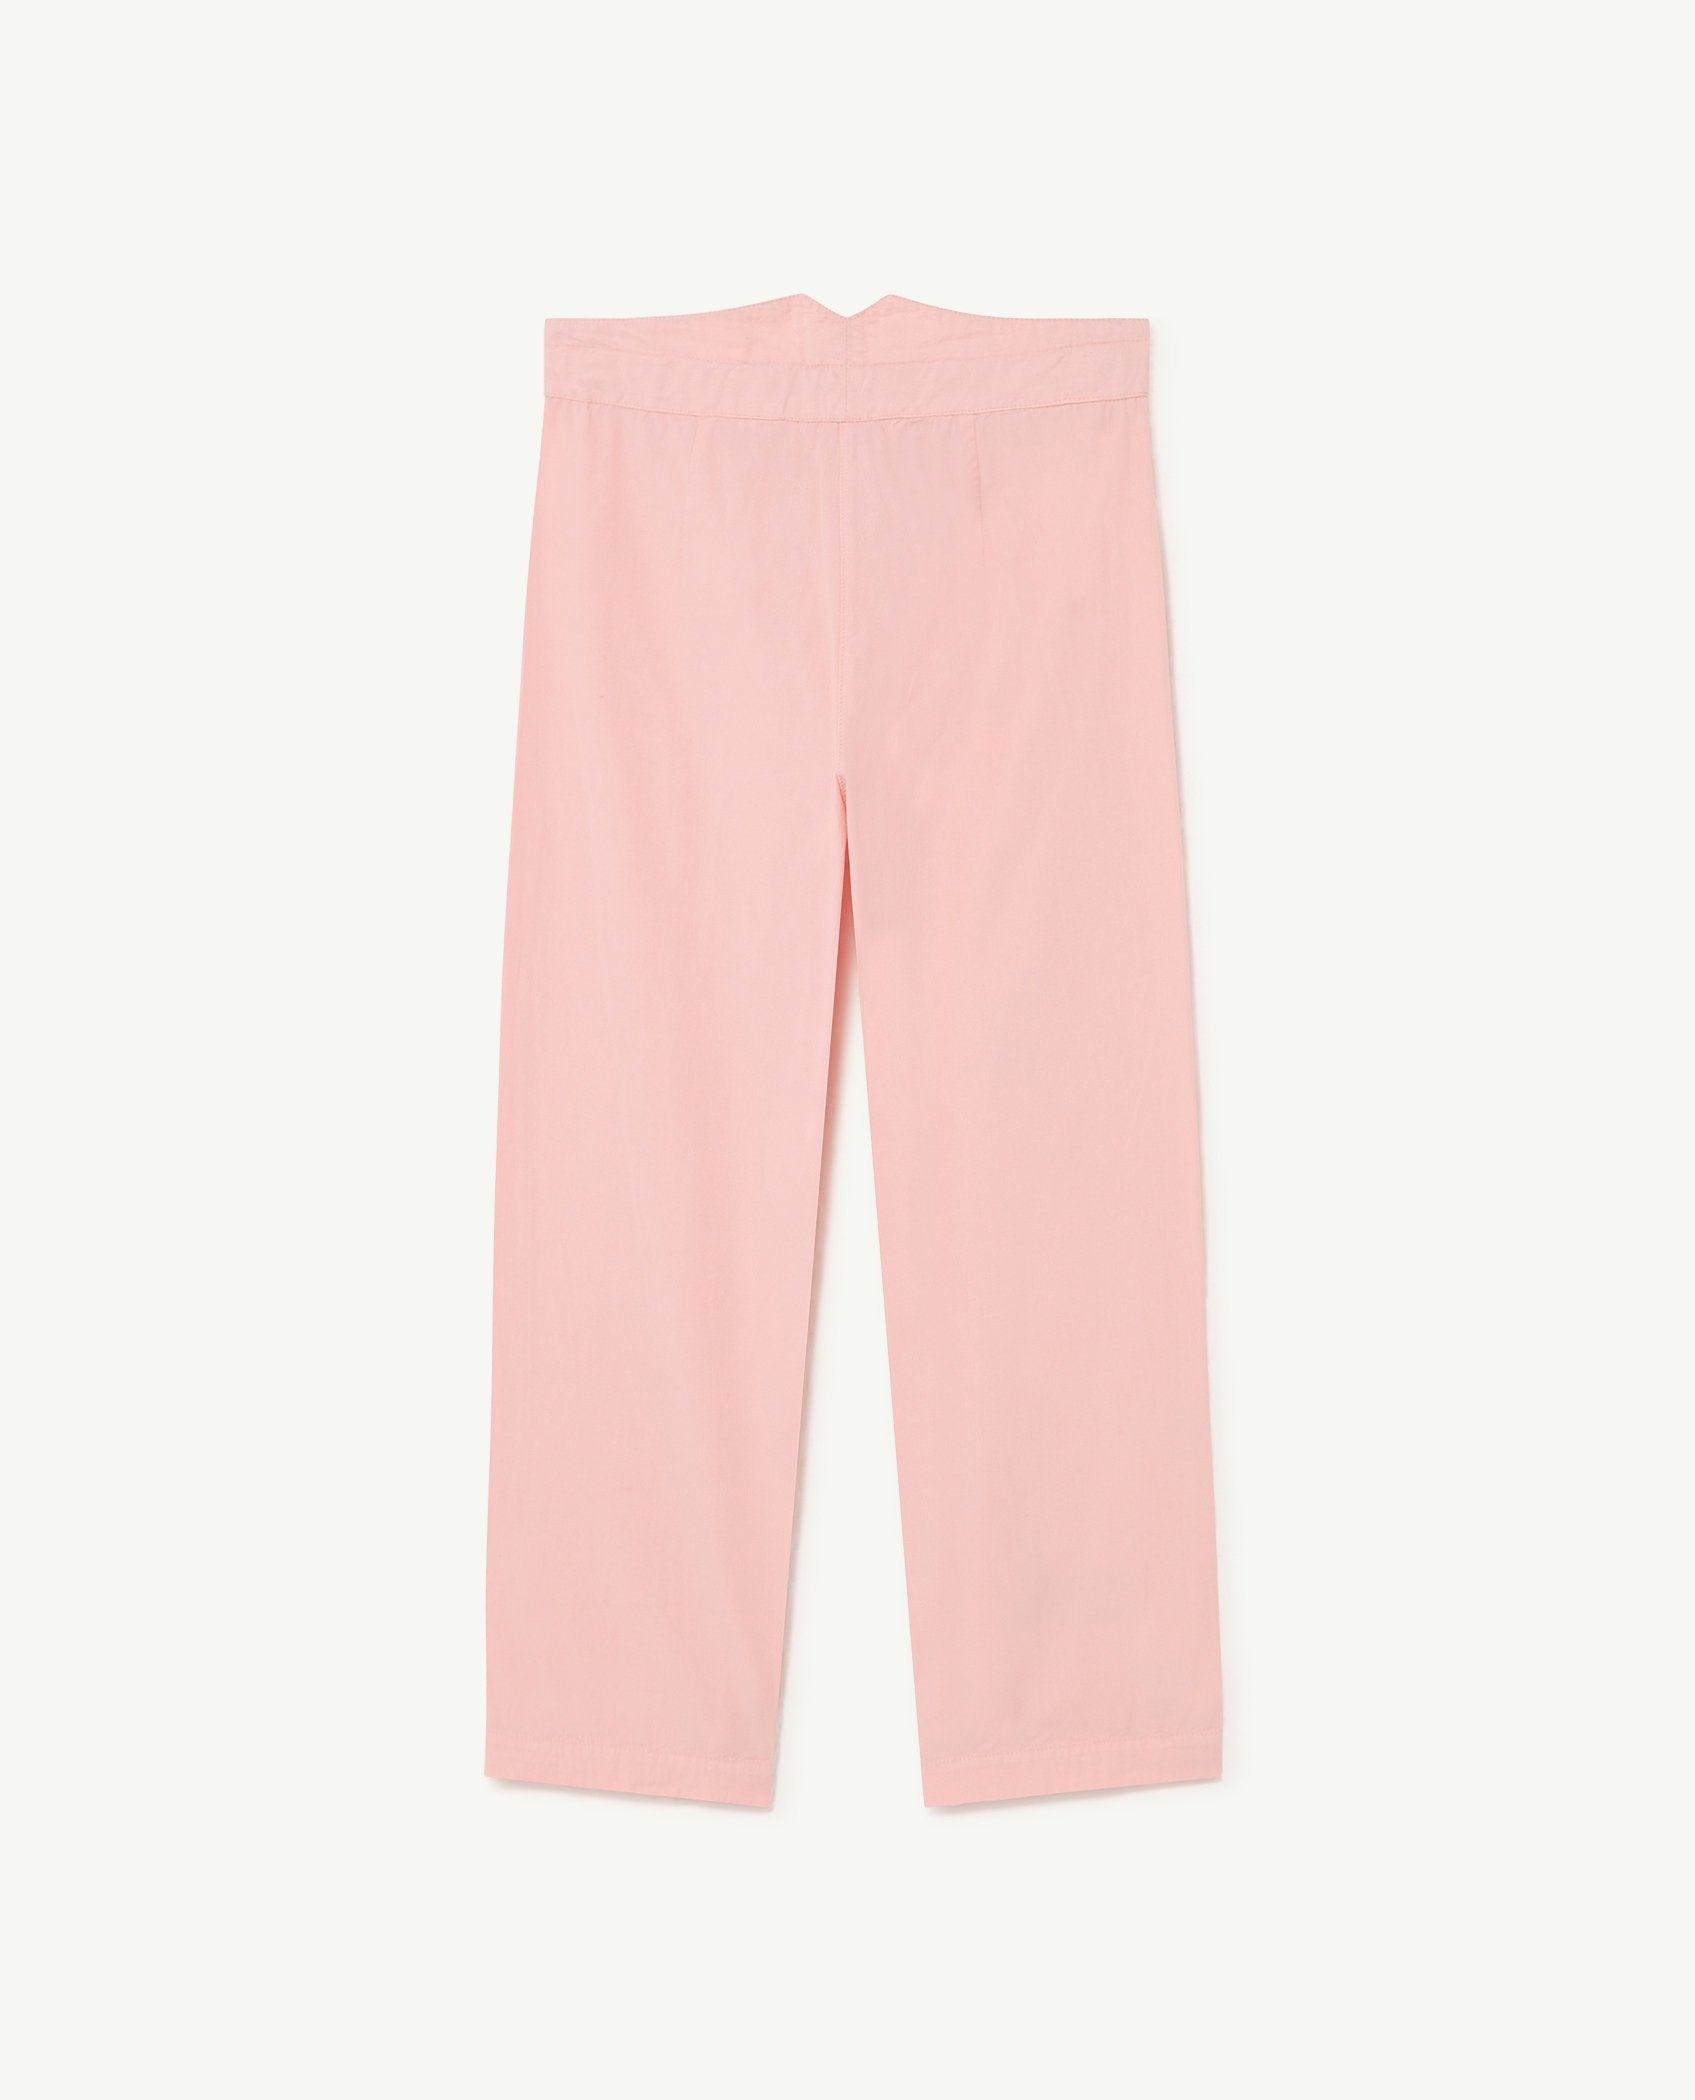 Pink The Animals Porcupine Pants PRODUCT BACK